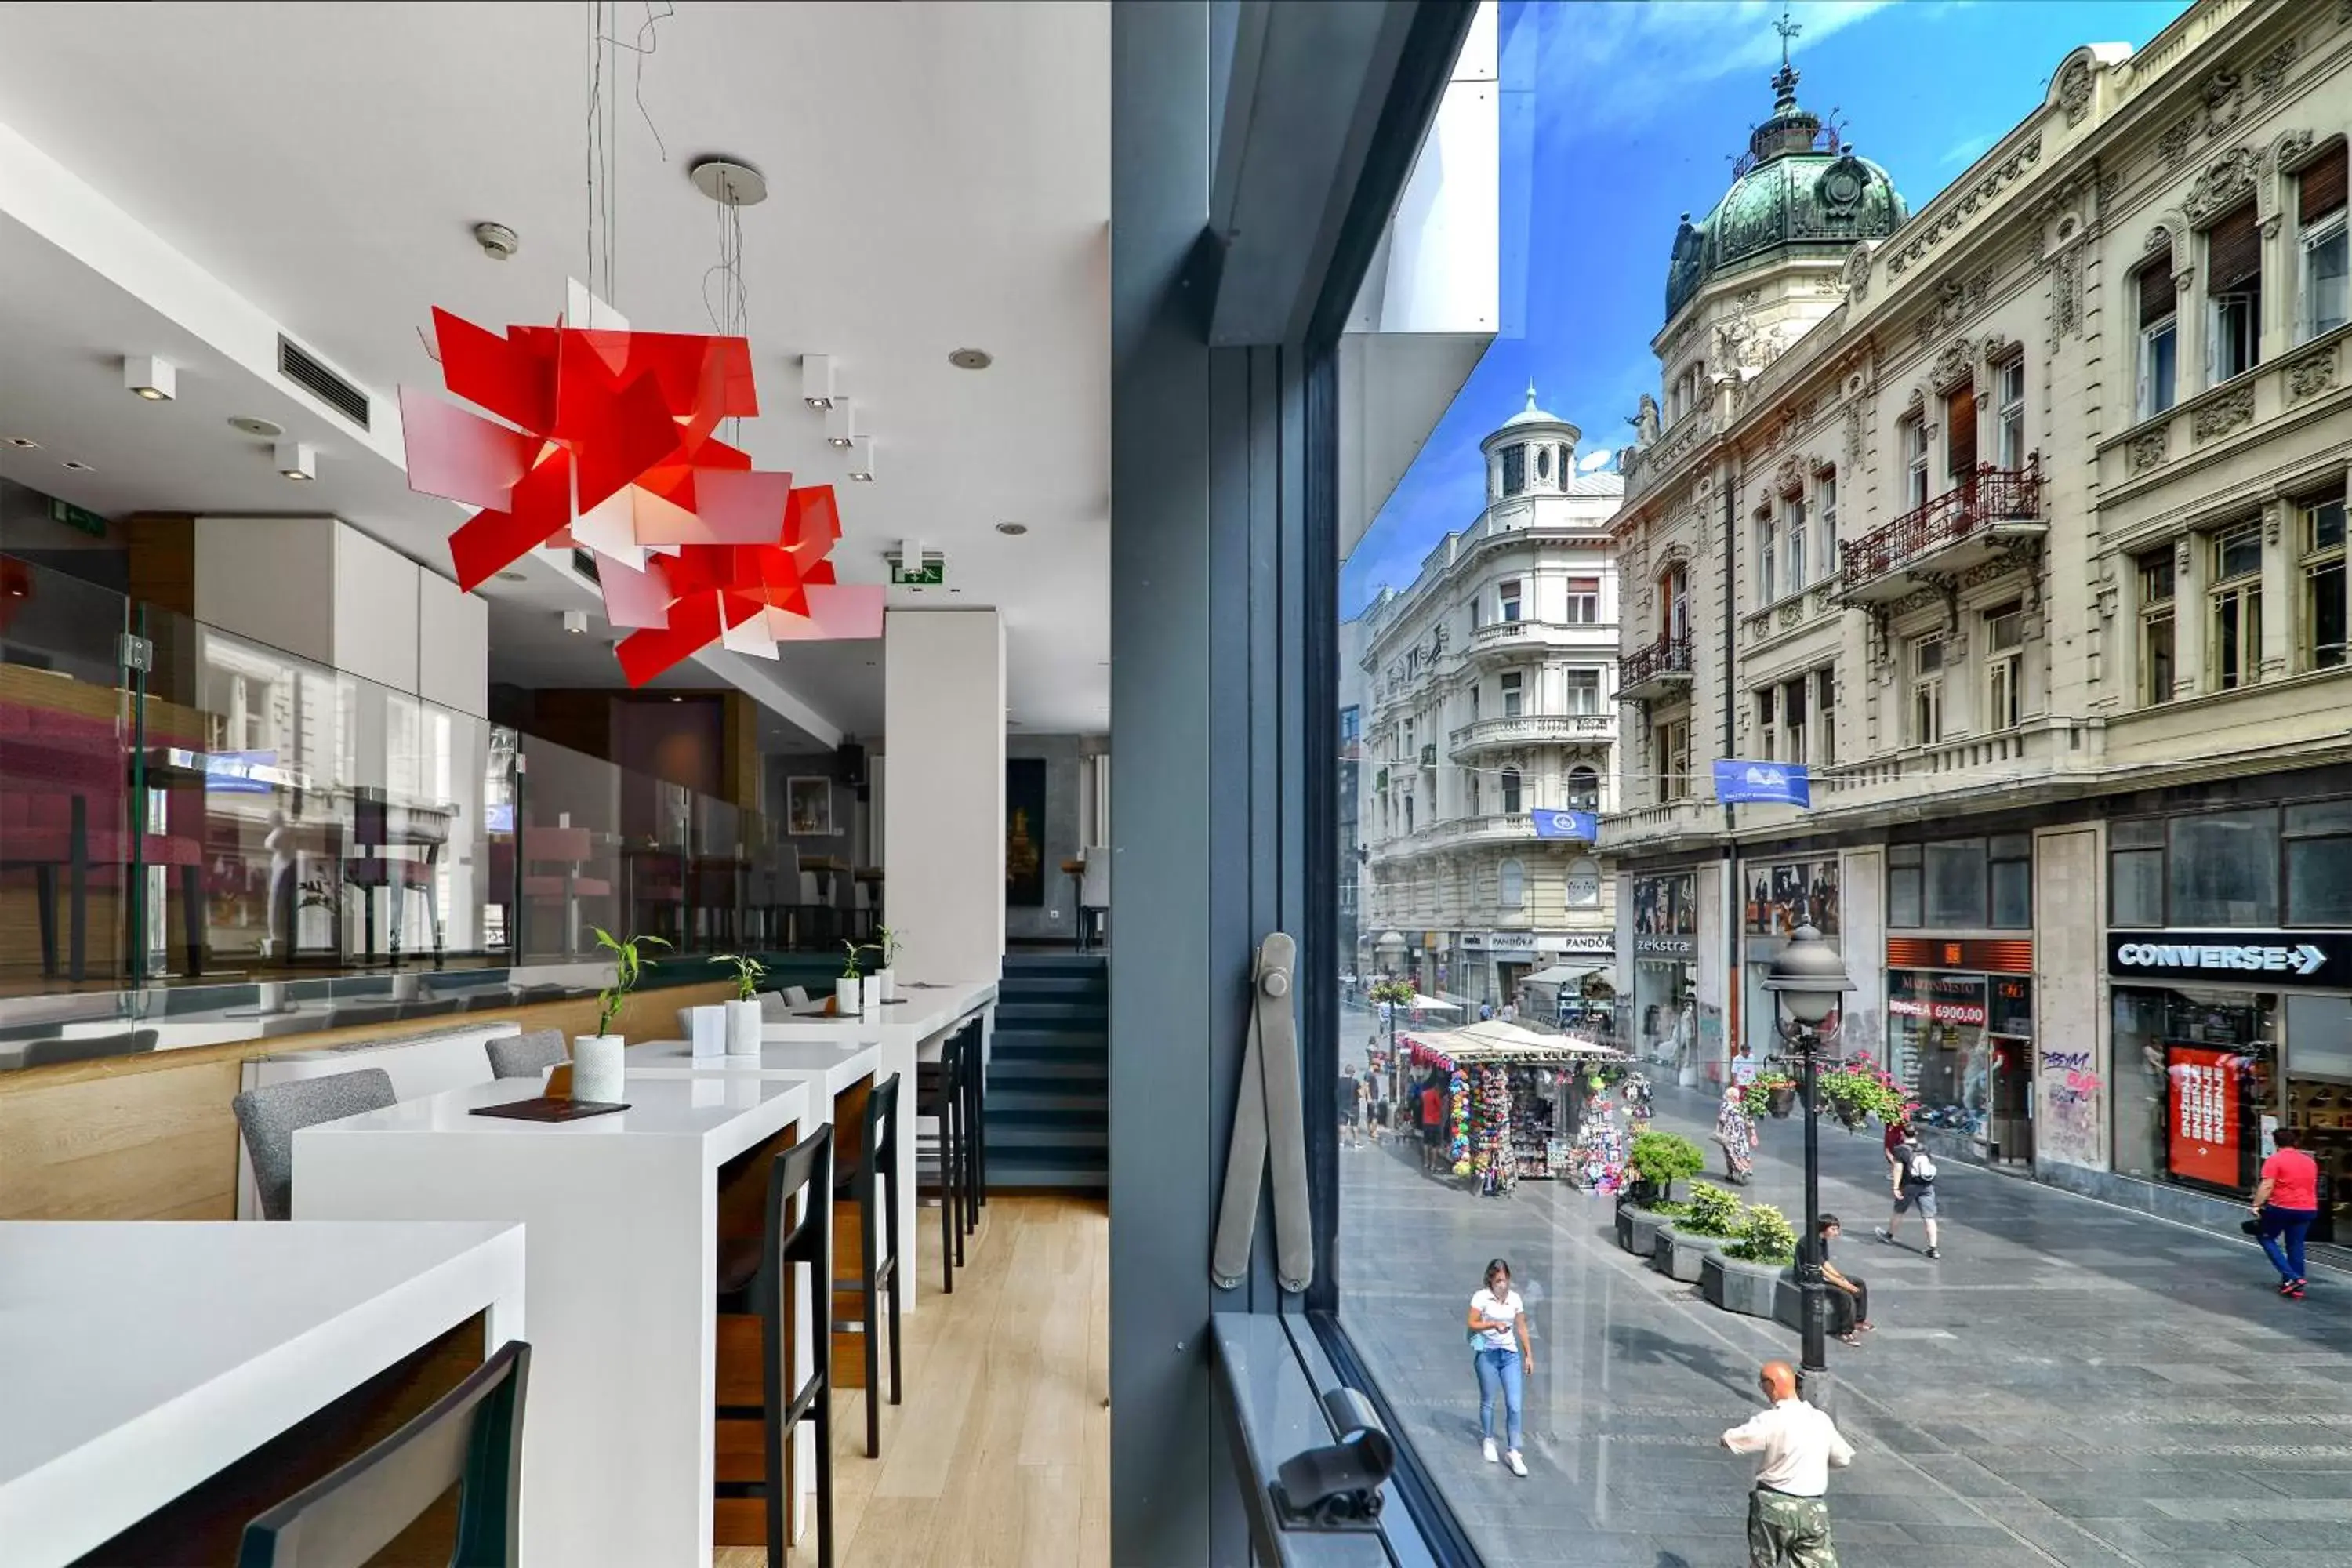 Restaurant/places to eat in Belgrade Art Hotel, a member of Radisson Individuals